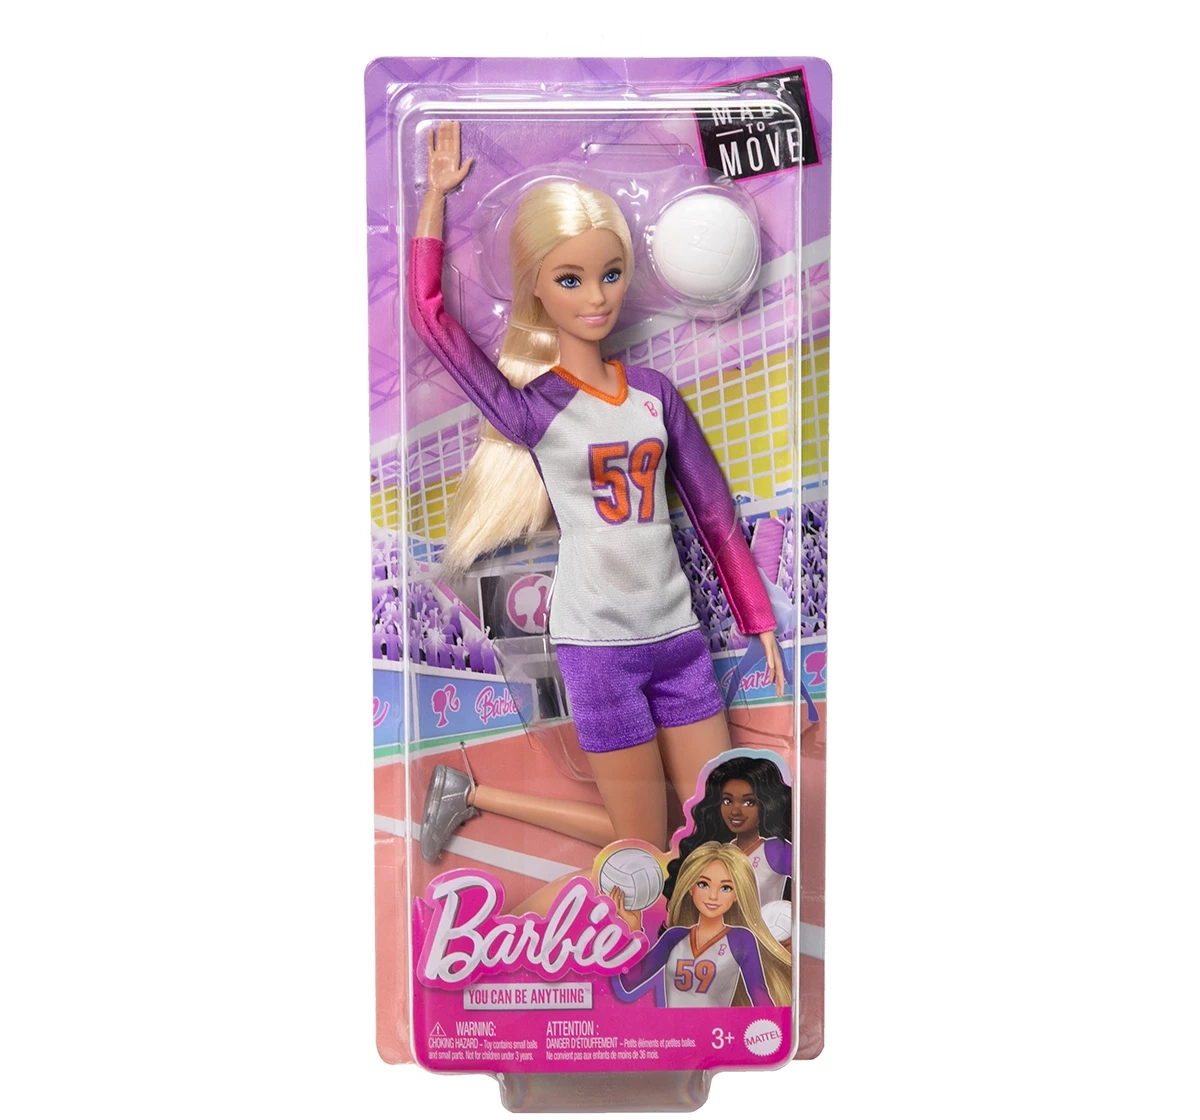 Barbie Doll & Accessories, Made to Move Career Volleyball Player Doll with Uniform and Ball, Kids for 3Y+, Multicolour, Assorted